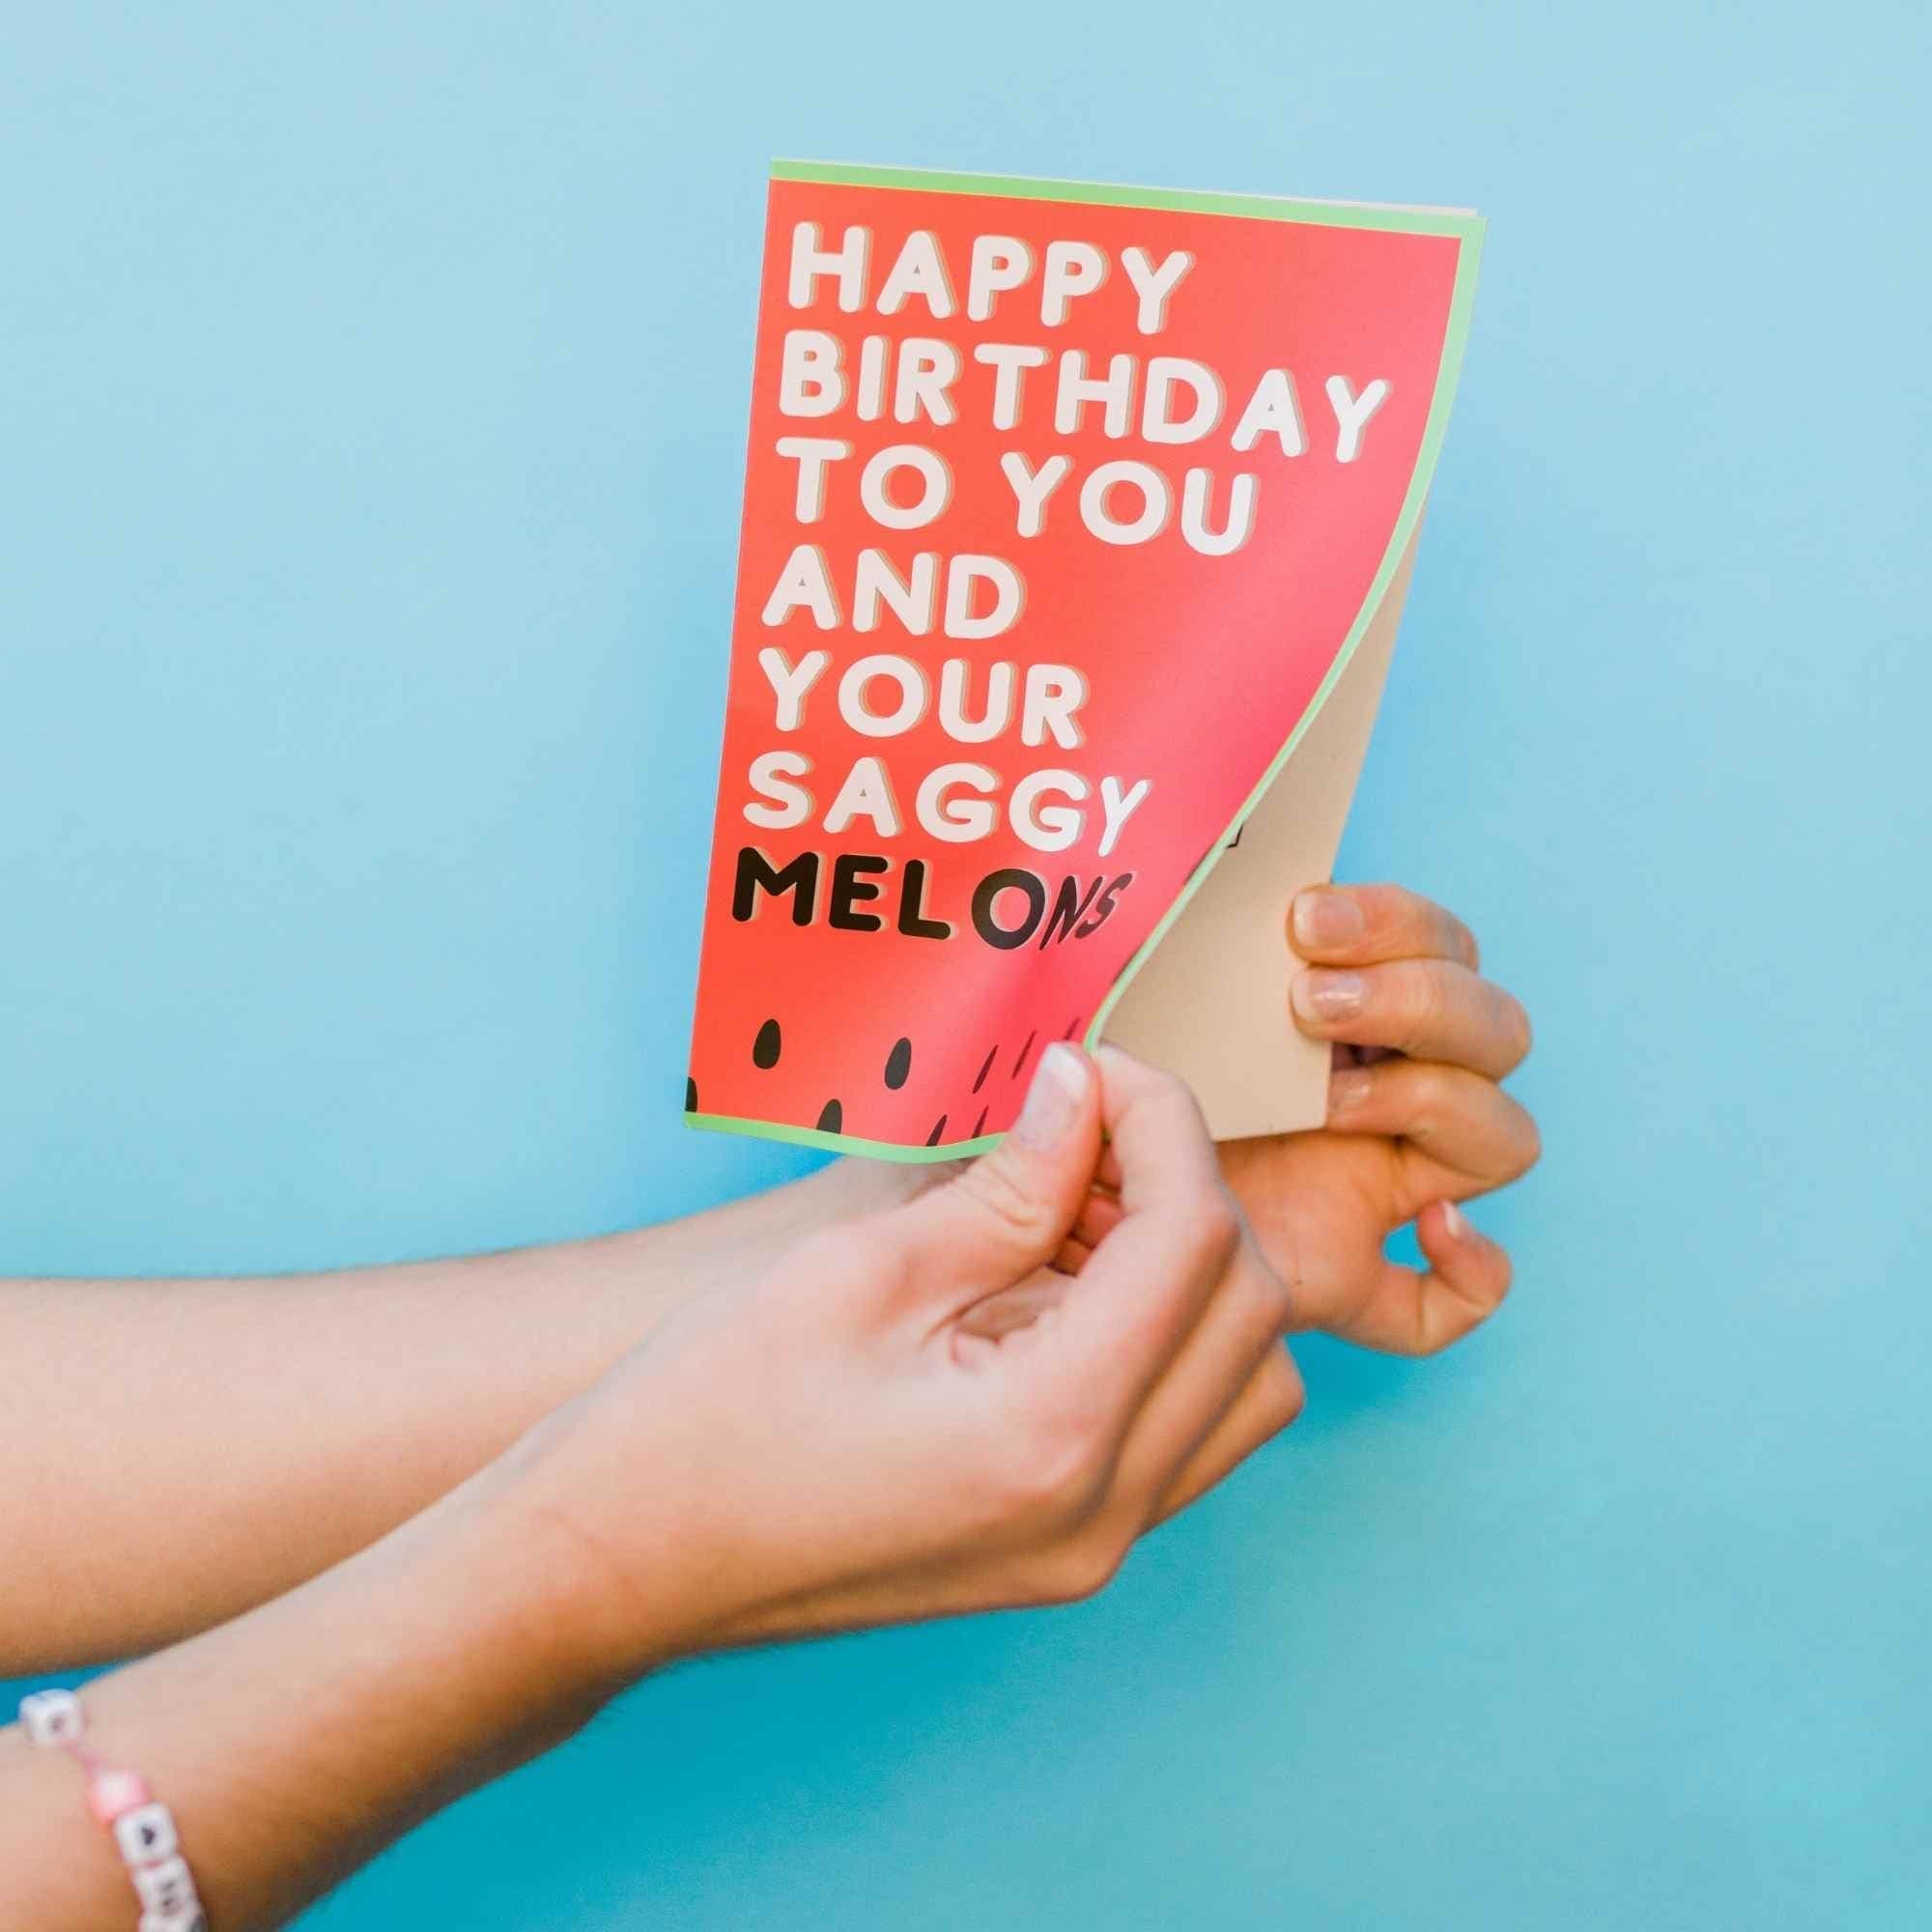 Happy Birthday to You and Your Saggy Melons! - Glitter Bomb Card - DickAtYourDoor